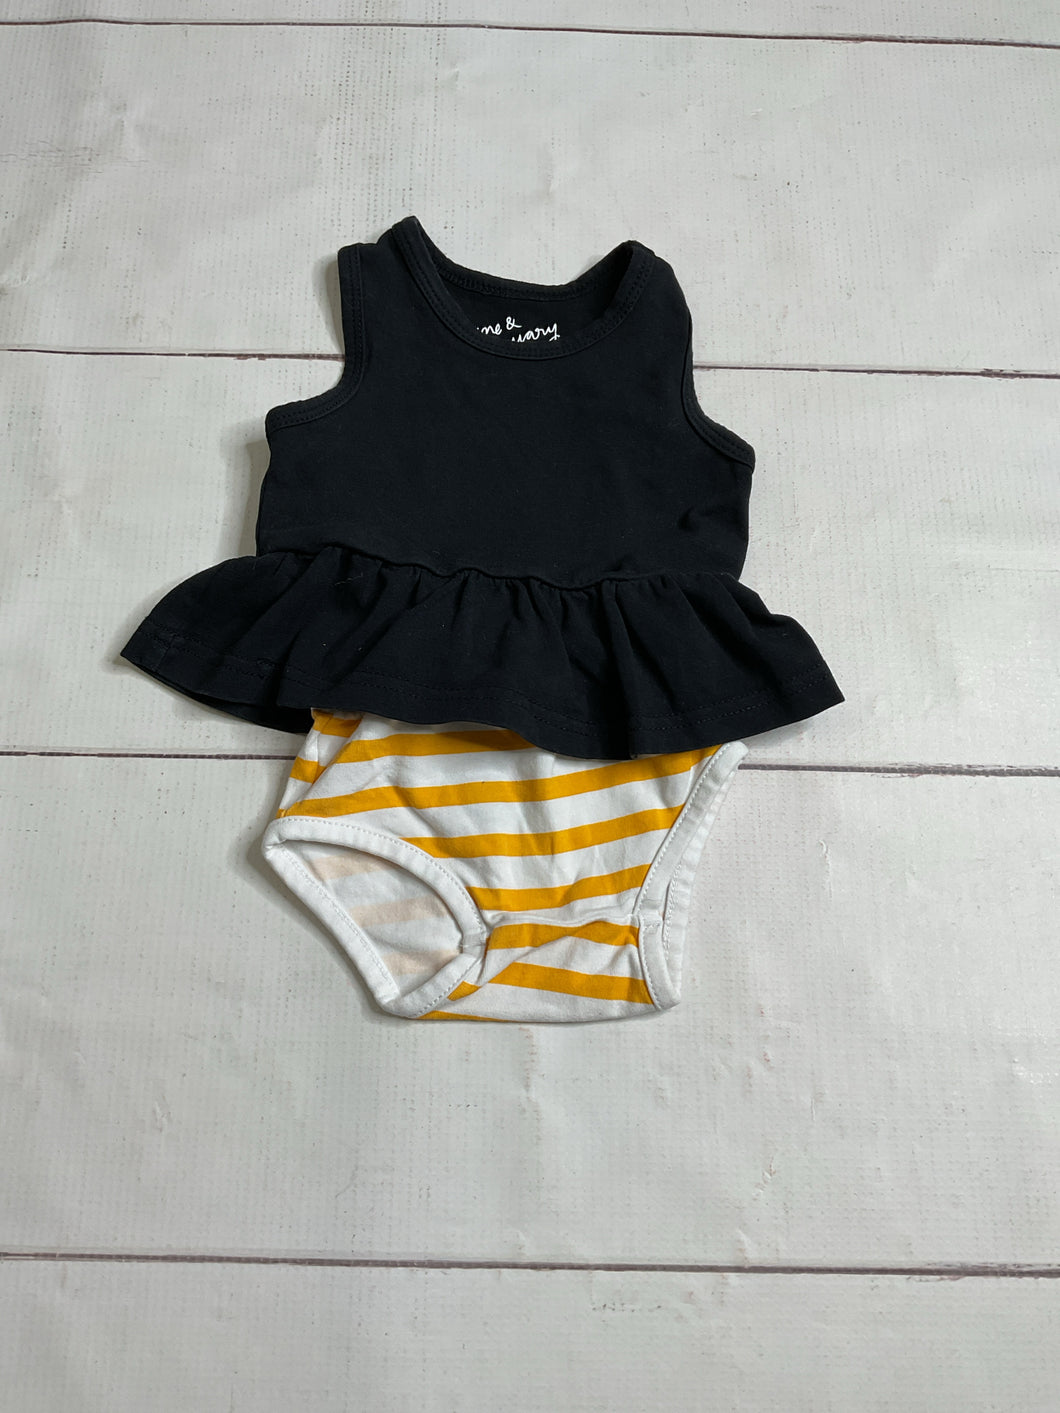 June & January Size 0/6M 2pc Outfit